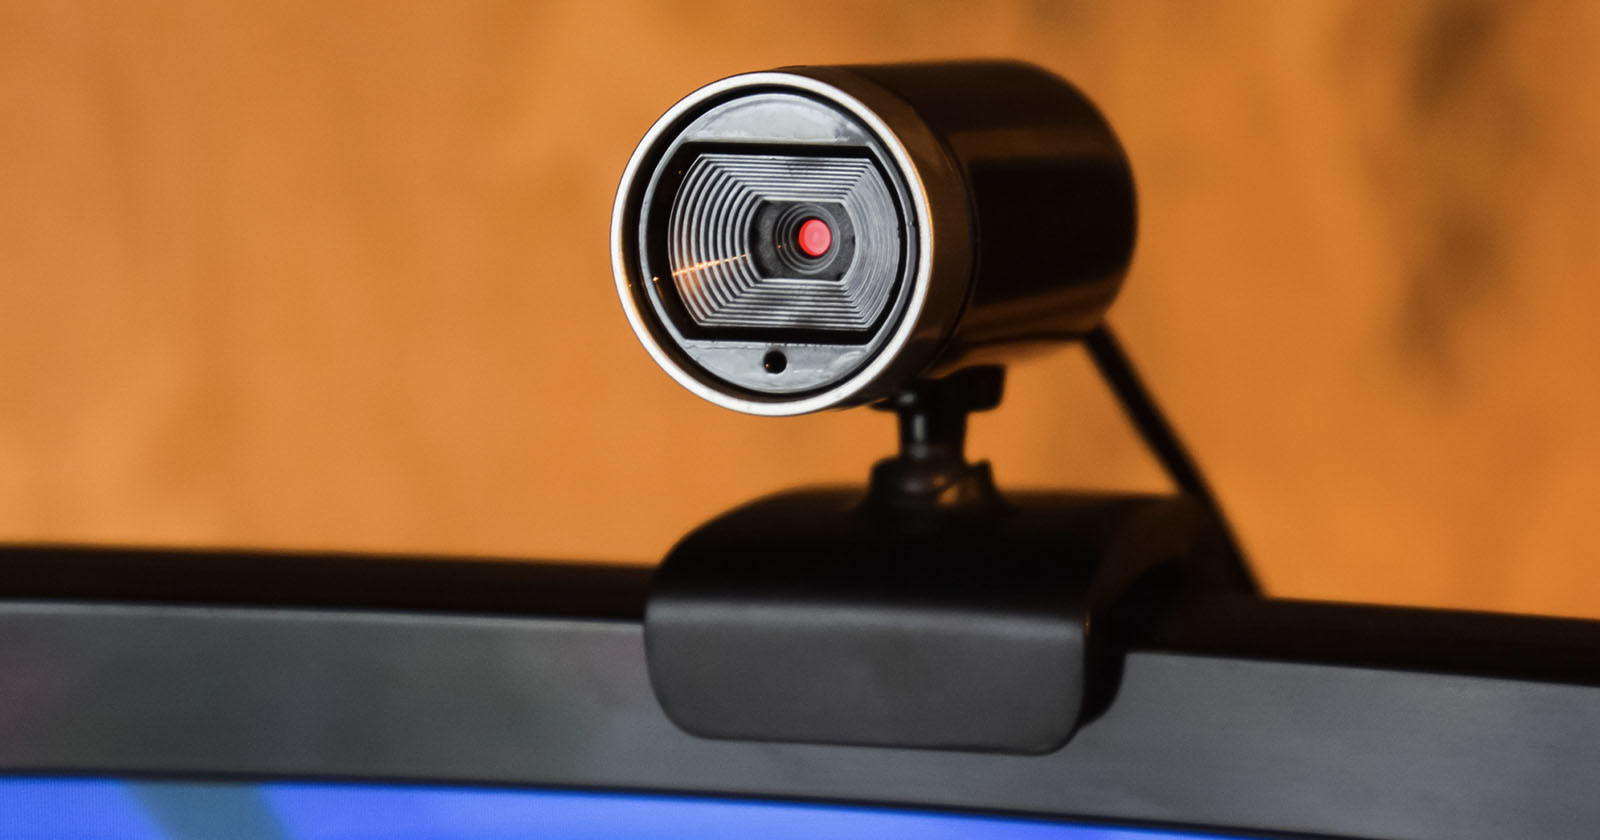  making employees keep webcam while working illegal court 